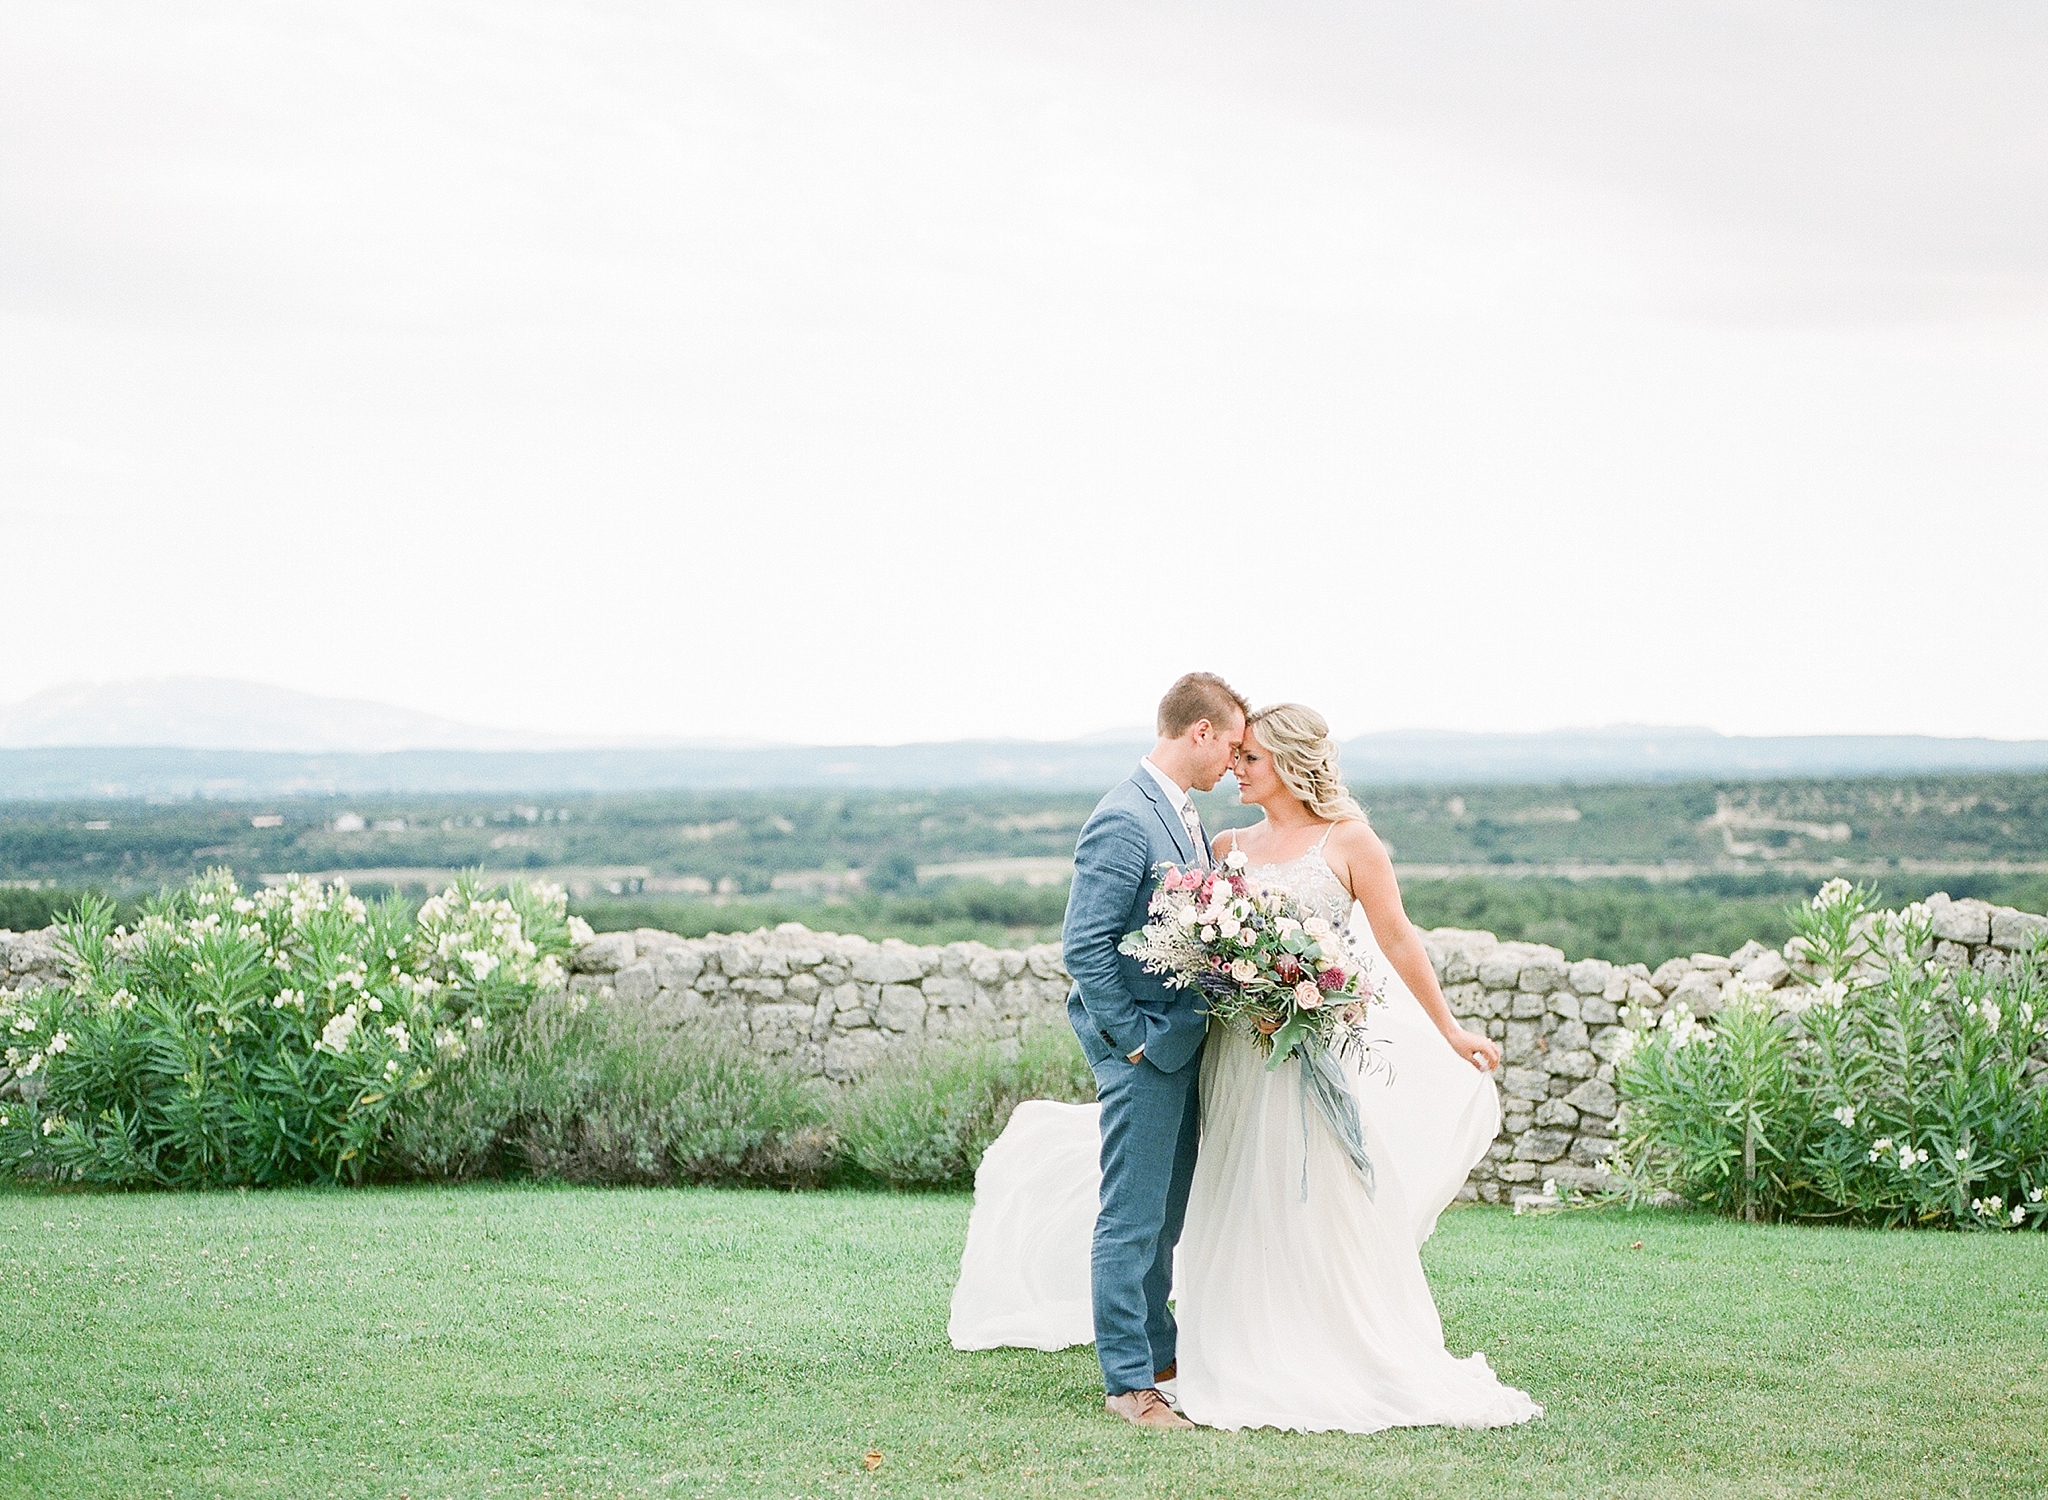 A romantic wedding at Domaine de Sarson in Grignan that was photographed by Provence, France destination film wedding photographer, Alicia Lacey.